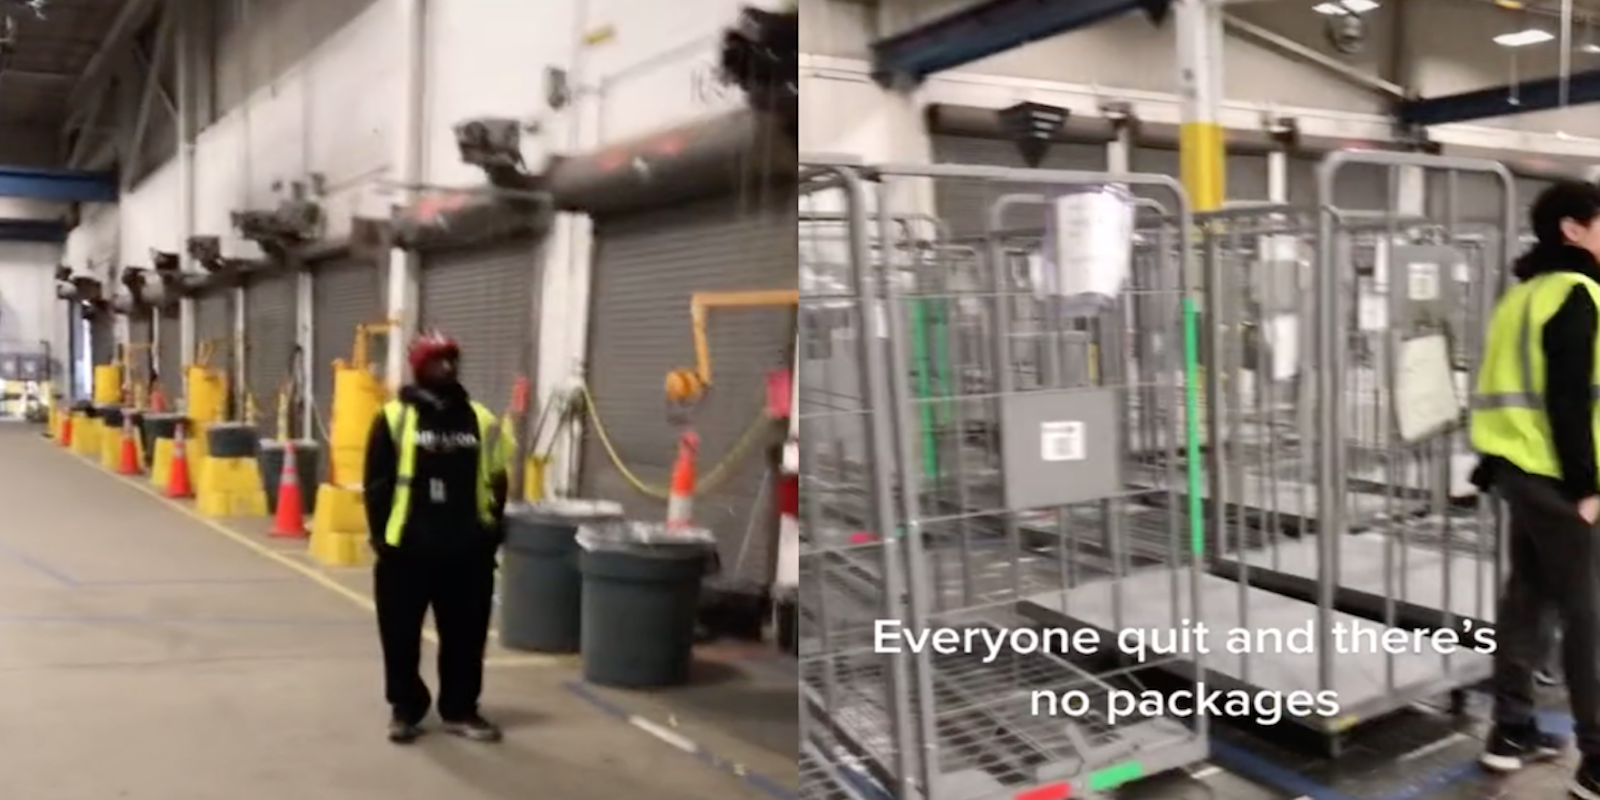 Two panel screenshot from TikTok showing Amazon workers standing around in an empty fulfillment center with no packages